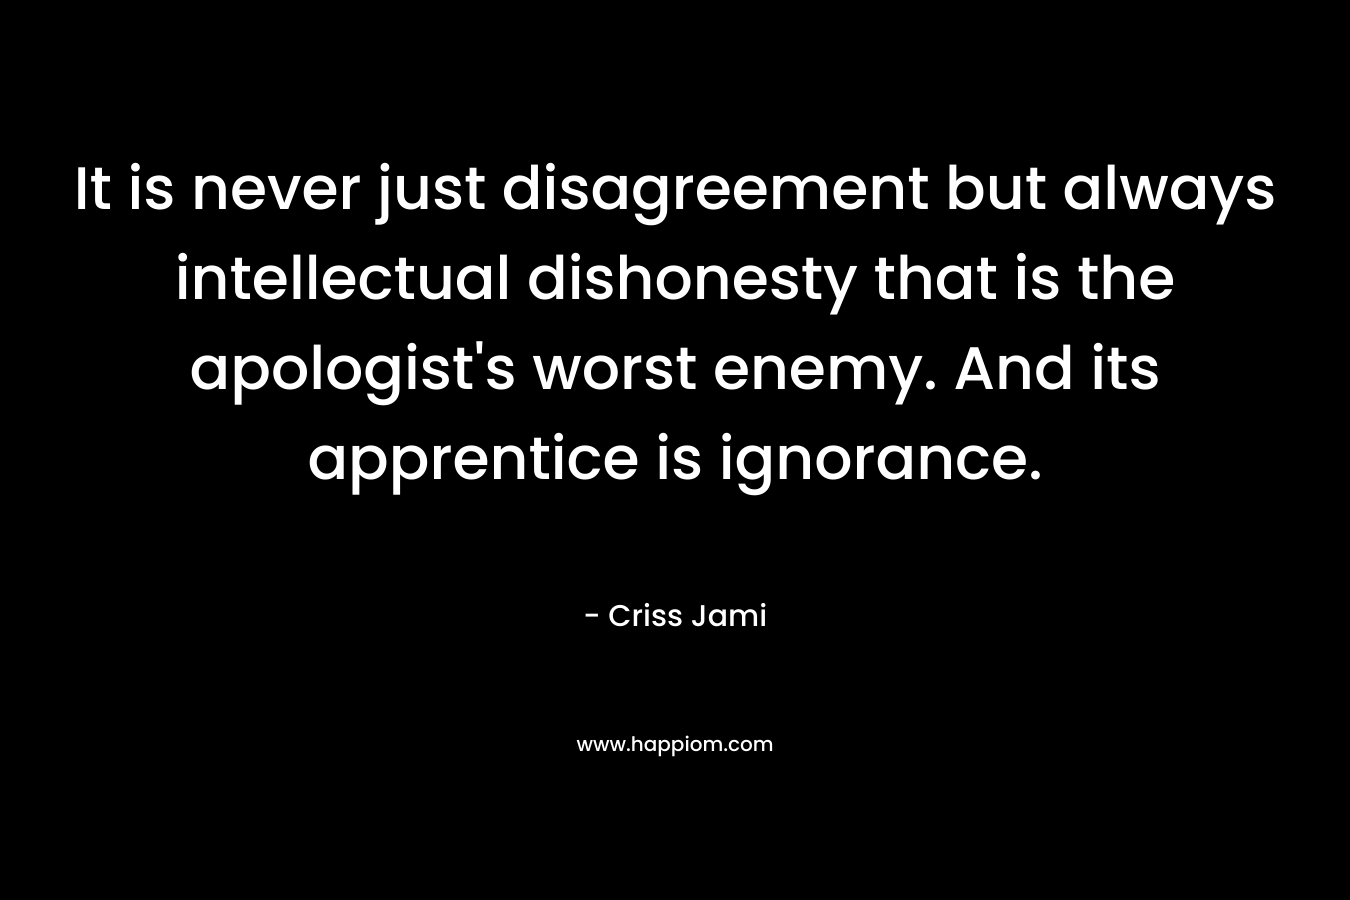 It is never just disagreement but always intellectual dishonesty that is the apologist’s worst enemy. And its apprentice is ignorance. – Criss Jami